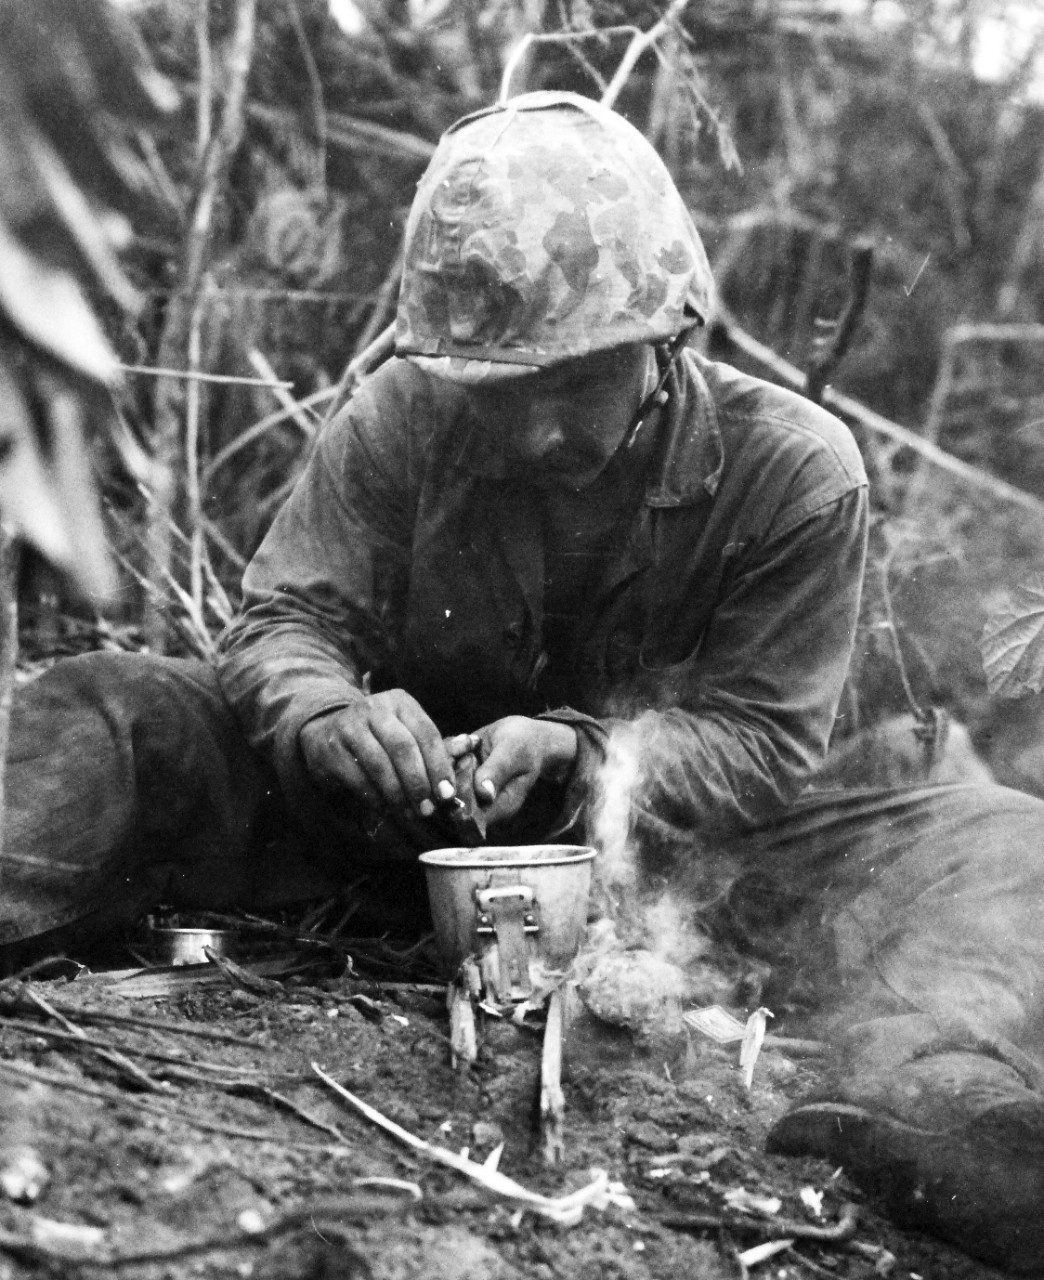 80-G-239318:   Invasion of Guam, July 21-August 10, 1944.   Private First Class Attilio Lattanz, who landed on Guam with the U.S. Marines on D-Day, has his first hot chow, several days later, as he scrapes chocolate from a ration bar into his mess cup, which he places on a small fire.  It wasn’t eight course dinner, but it was better than cold rations,   released August 5, 1944.    Official U.S. Navy Photograph, now in the collections of the National Archives.  (2017/03/07).